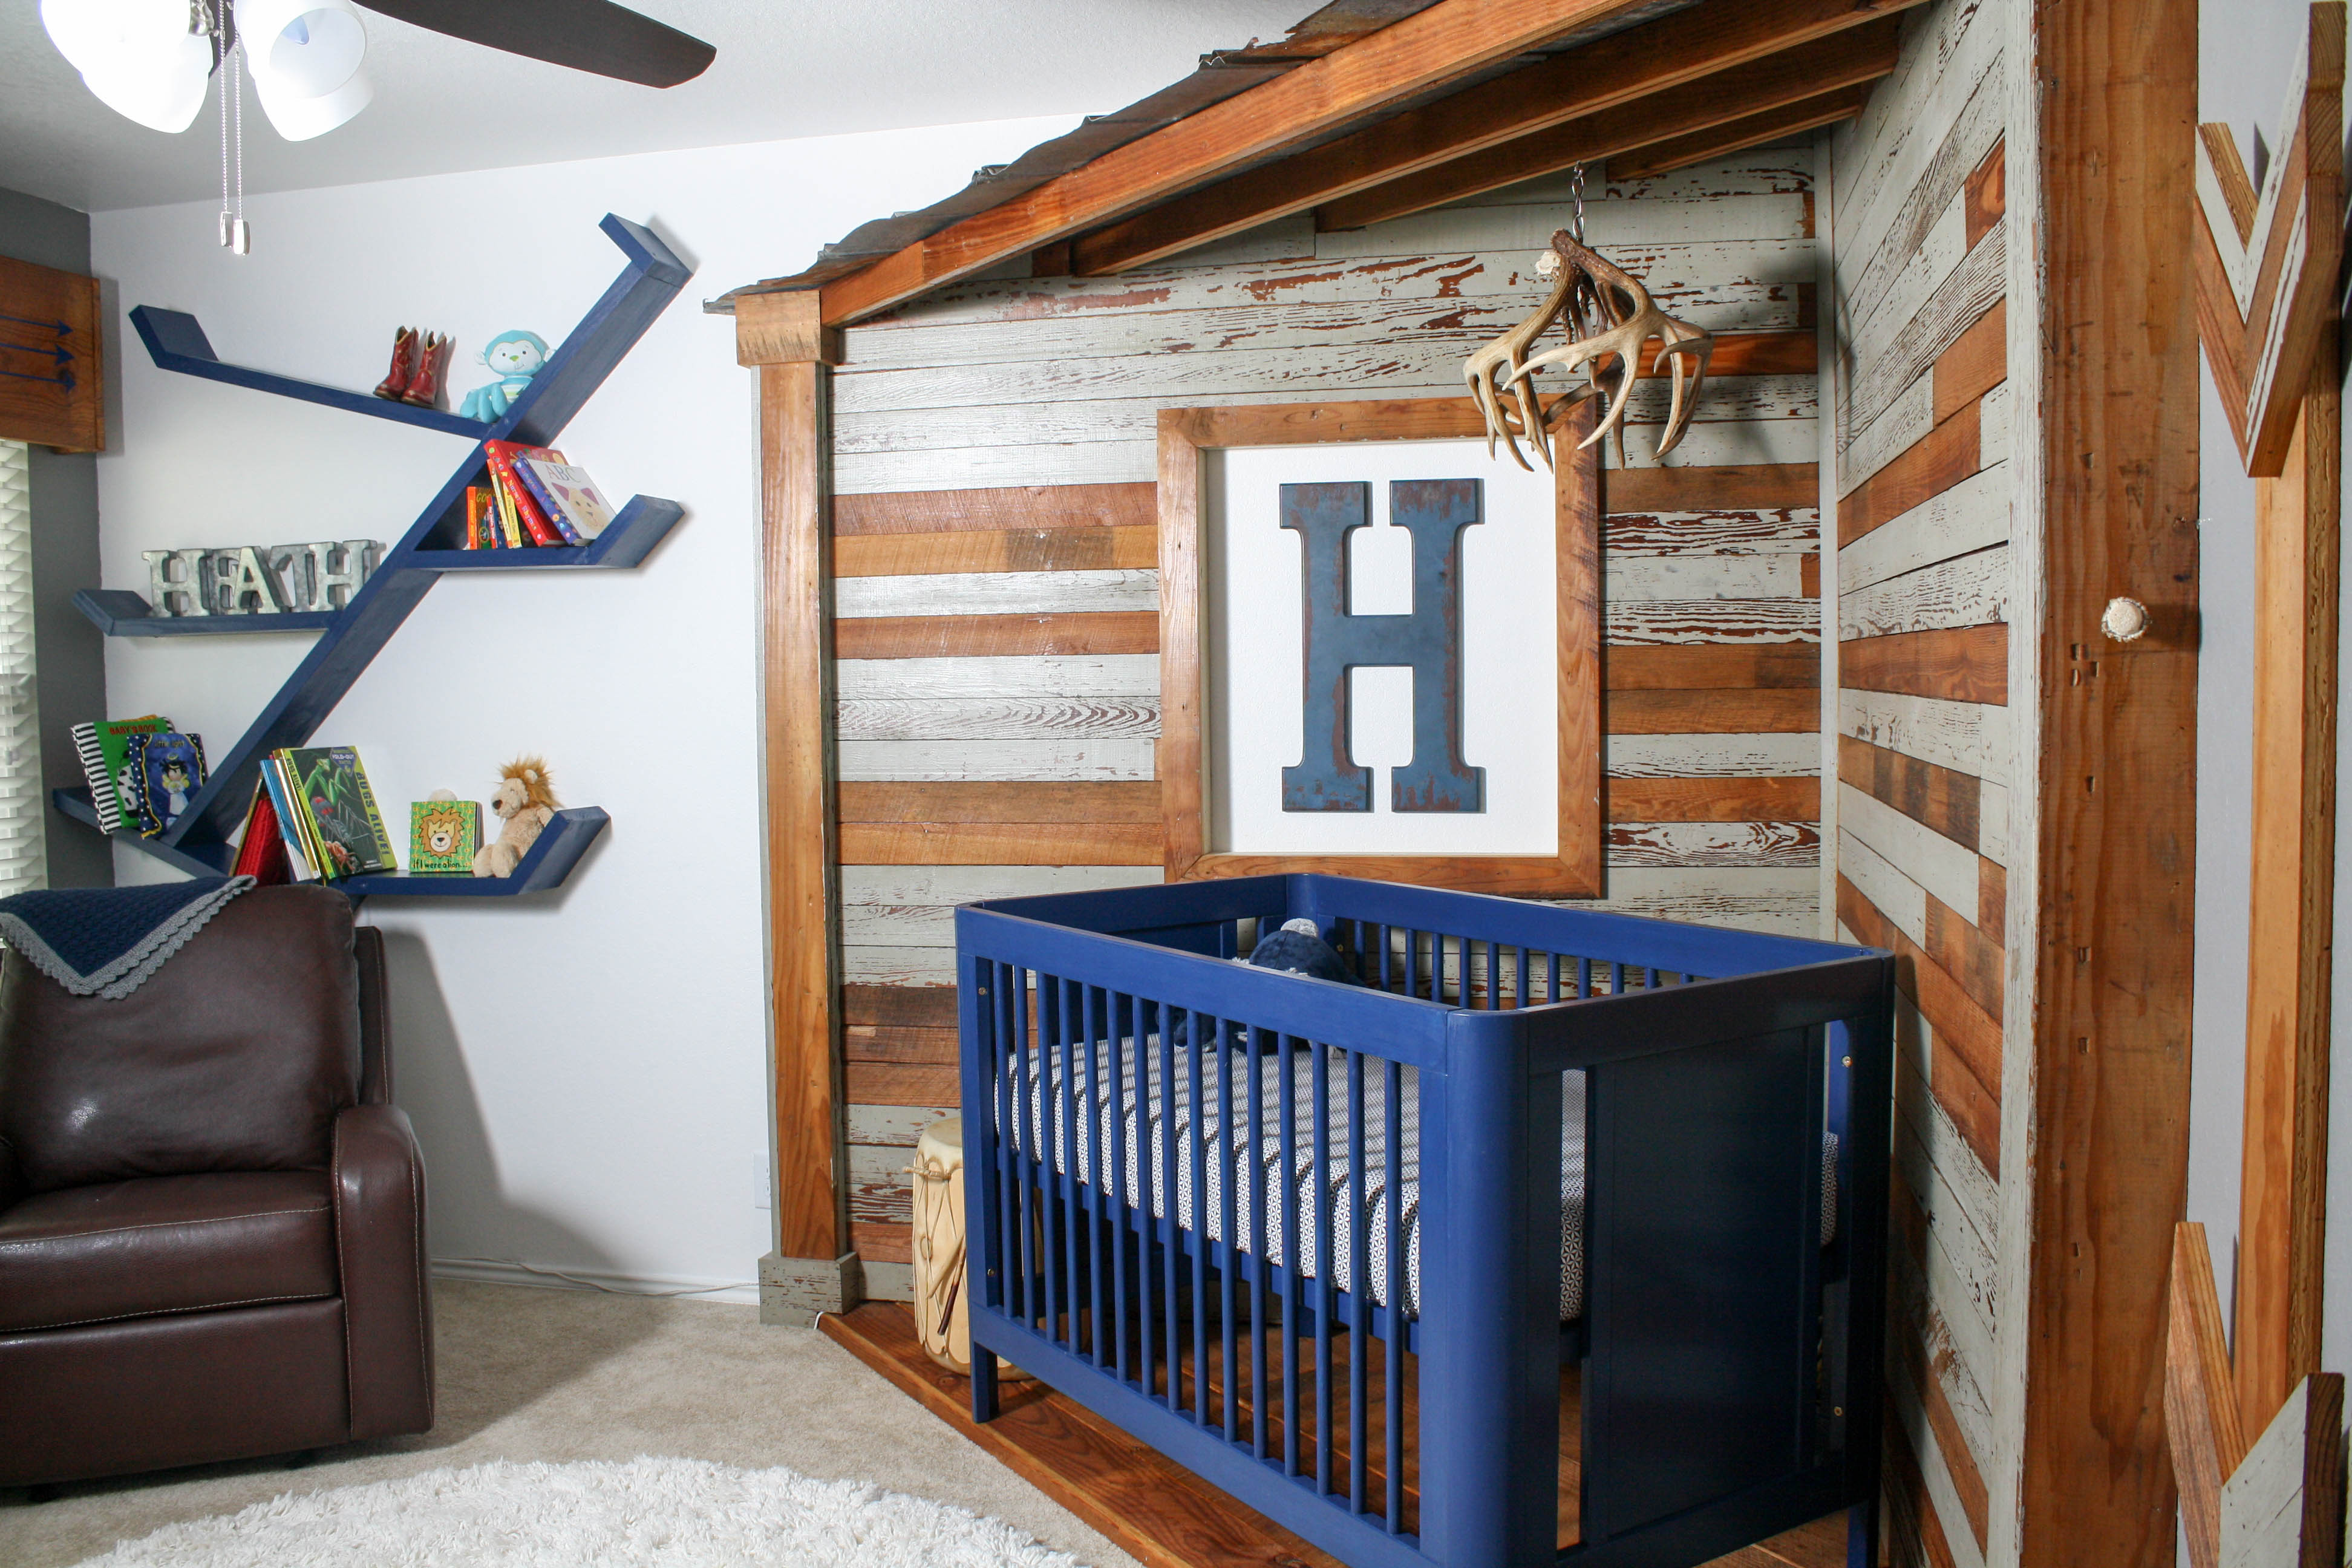 Start Catching Dreams with this Whimsical DIY - Project Nursery